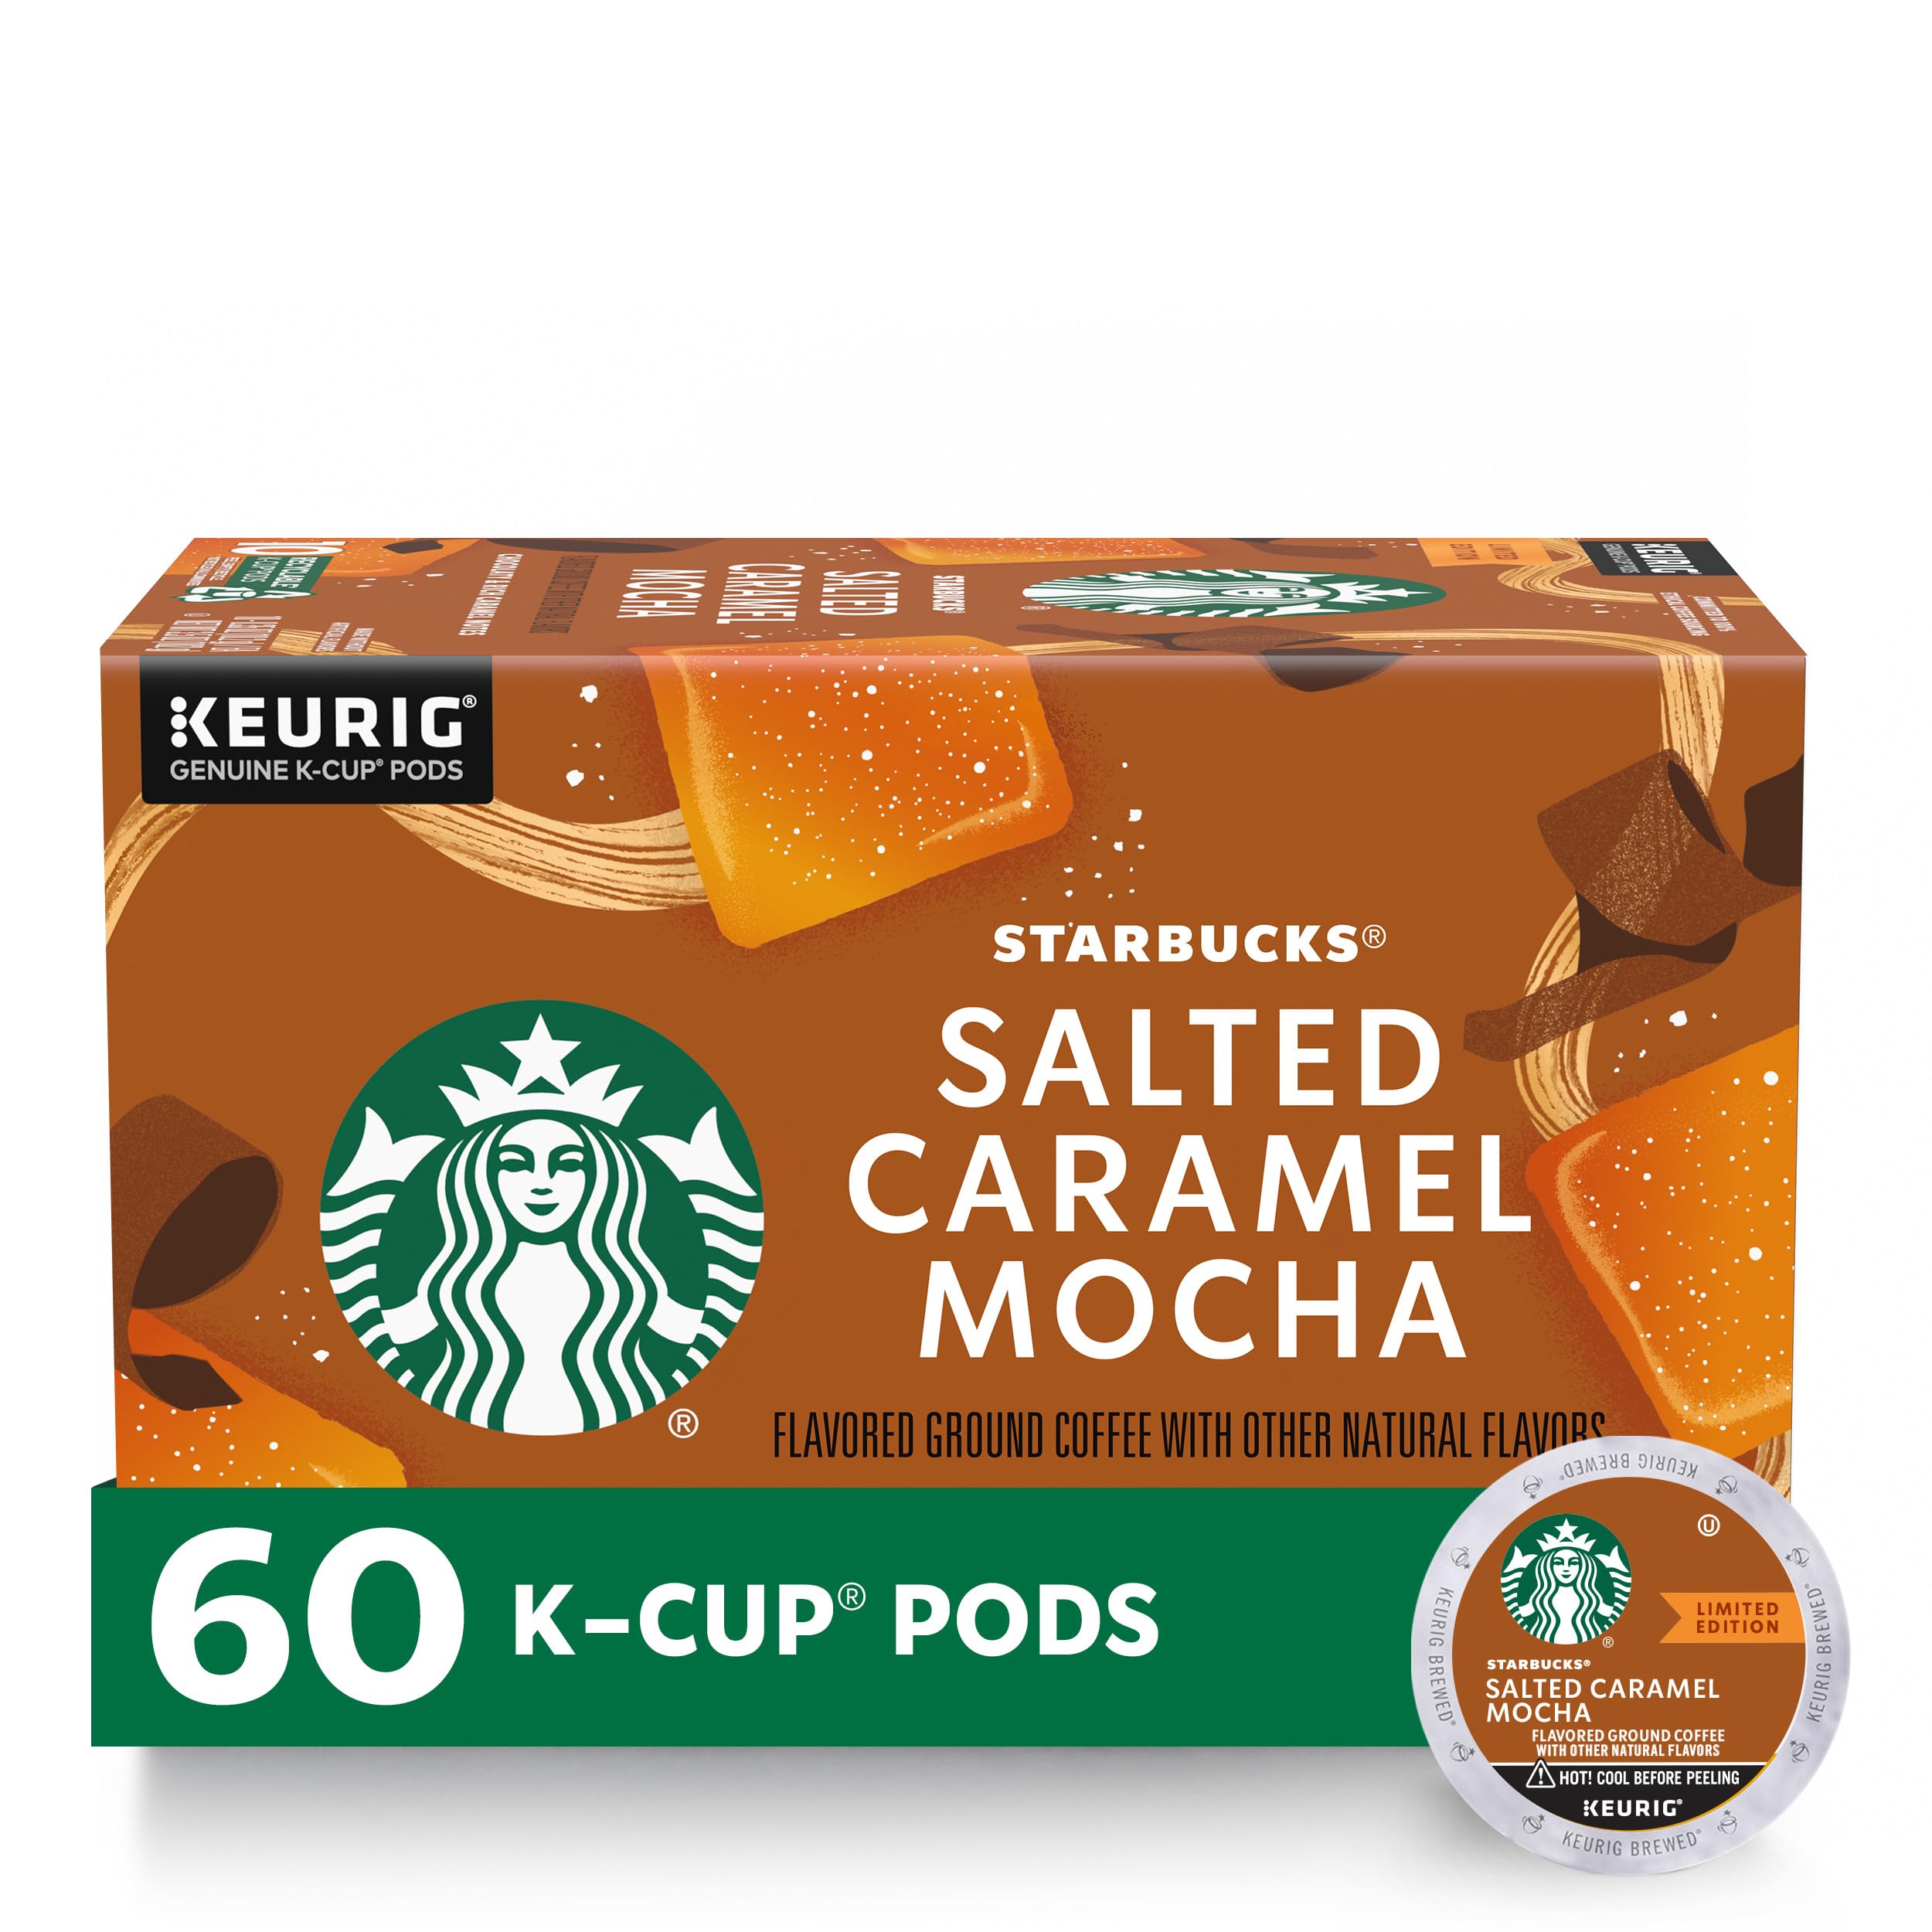 Starbucks K-Cup Coffee Pods—Salted Caramel Mocha Flavored Coffee—100% Arabica—Naturally Flavored—6 boxes (60 pods total)